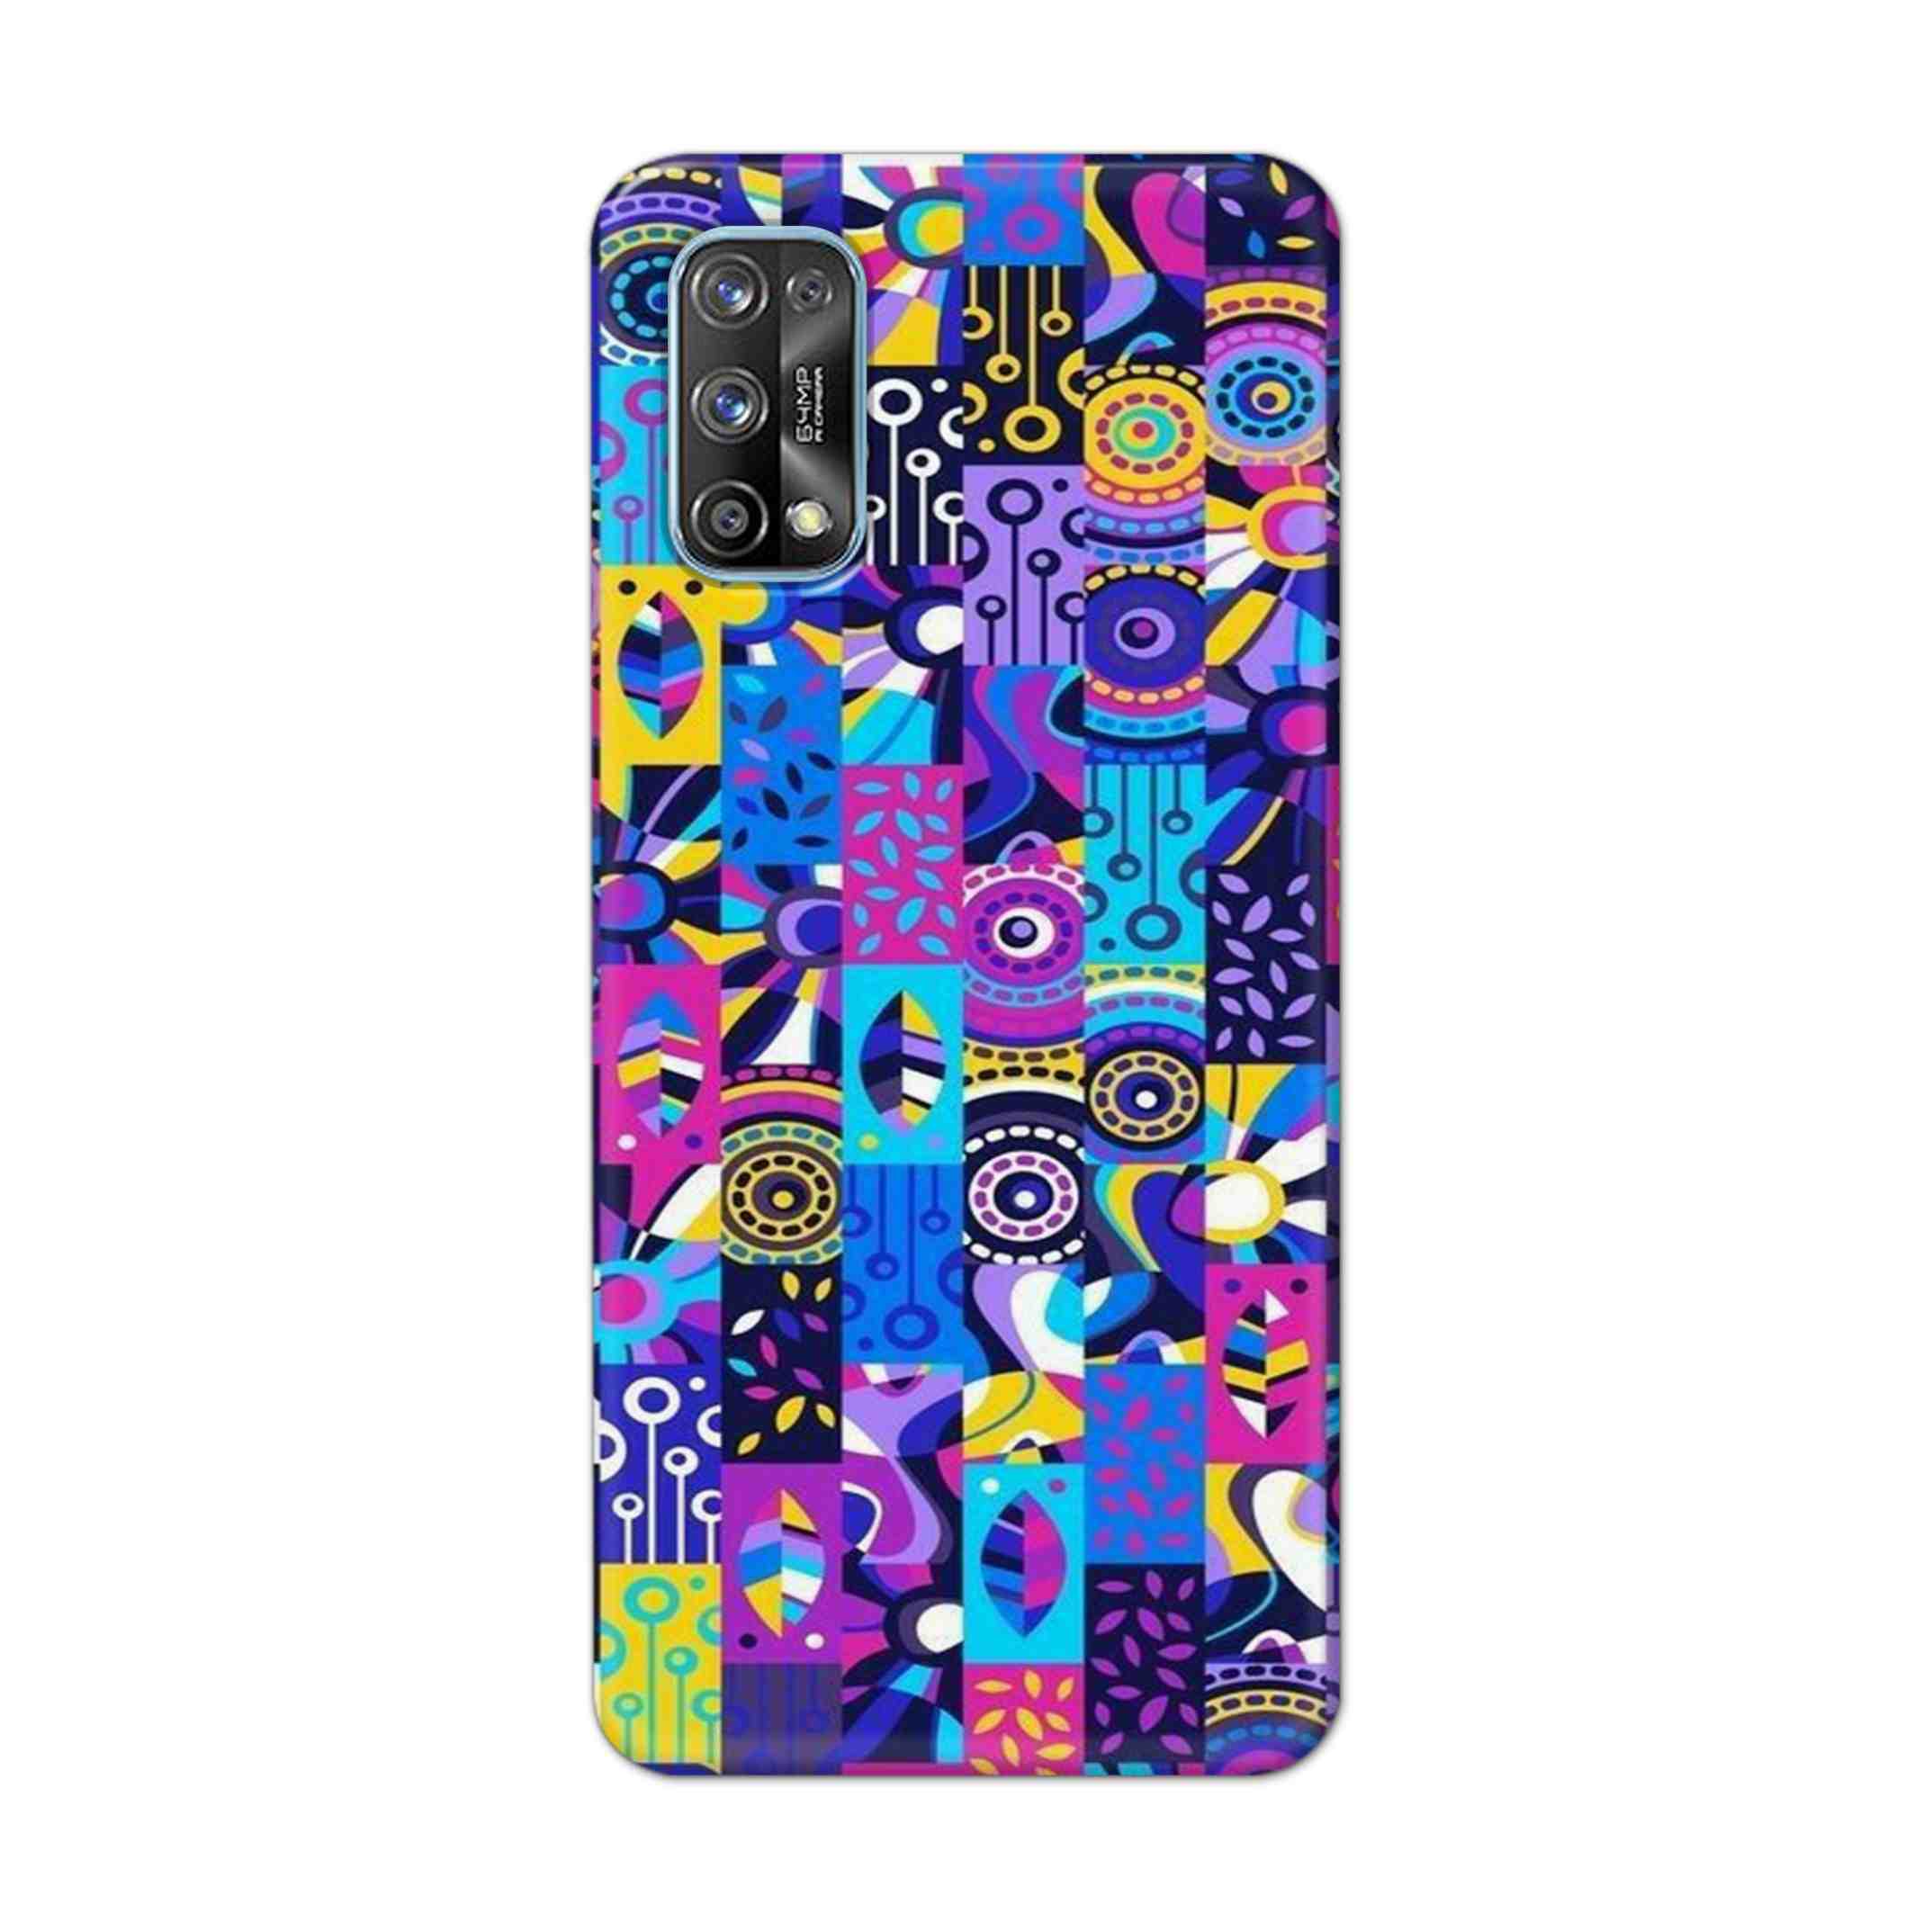 Buy Rainbow Art Hard Back Mobile Phone Case Cover For Realme 7 Pro Online